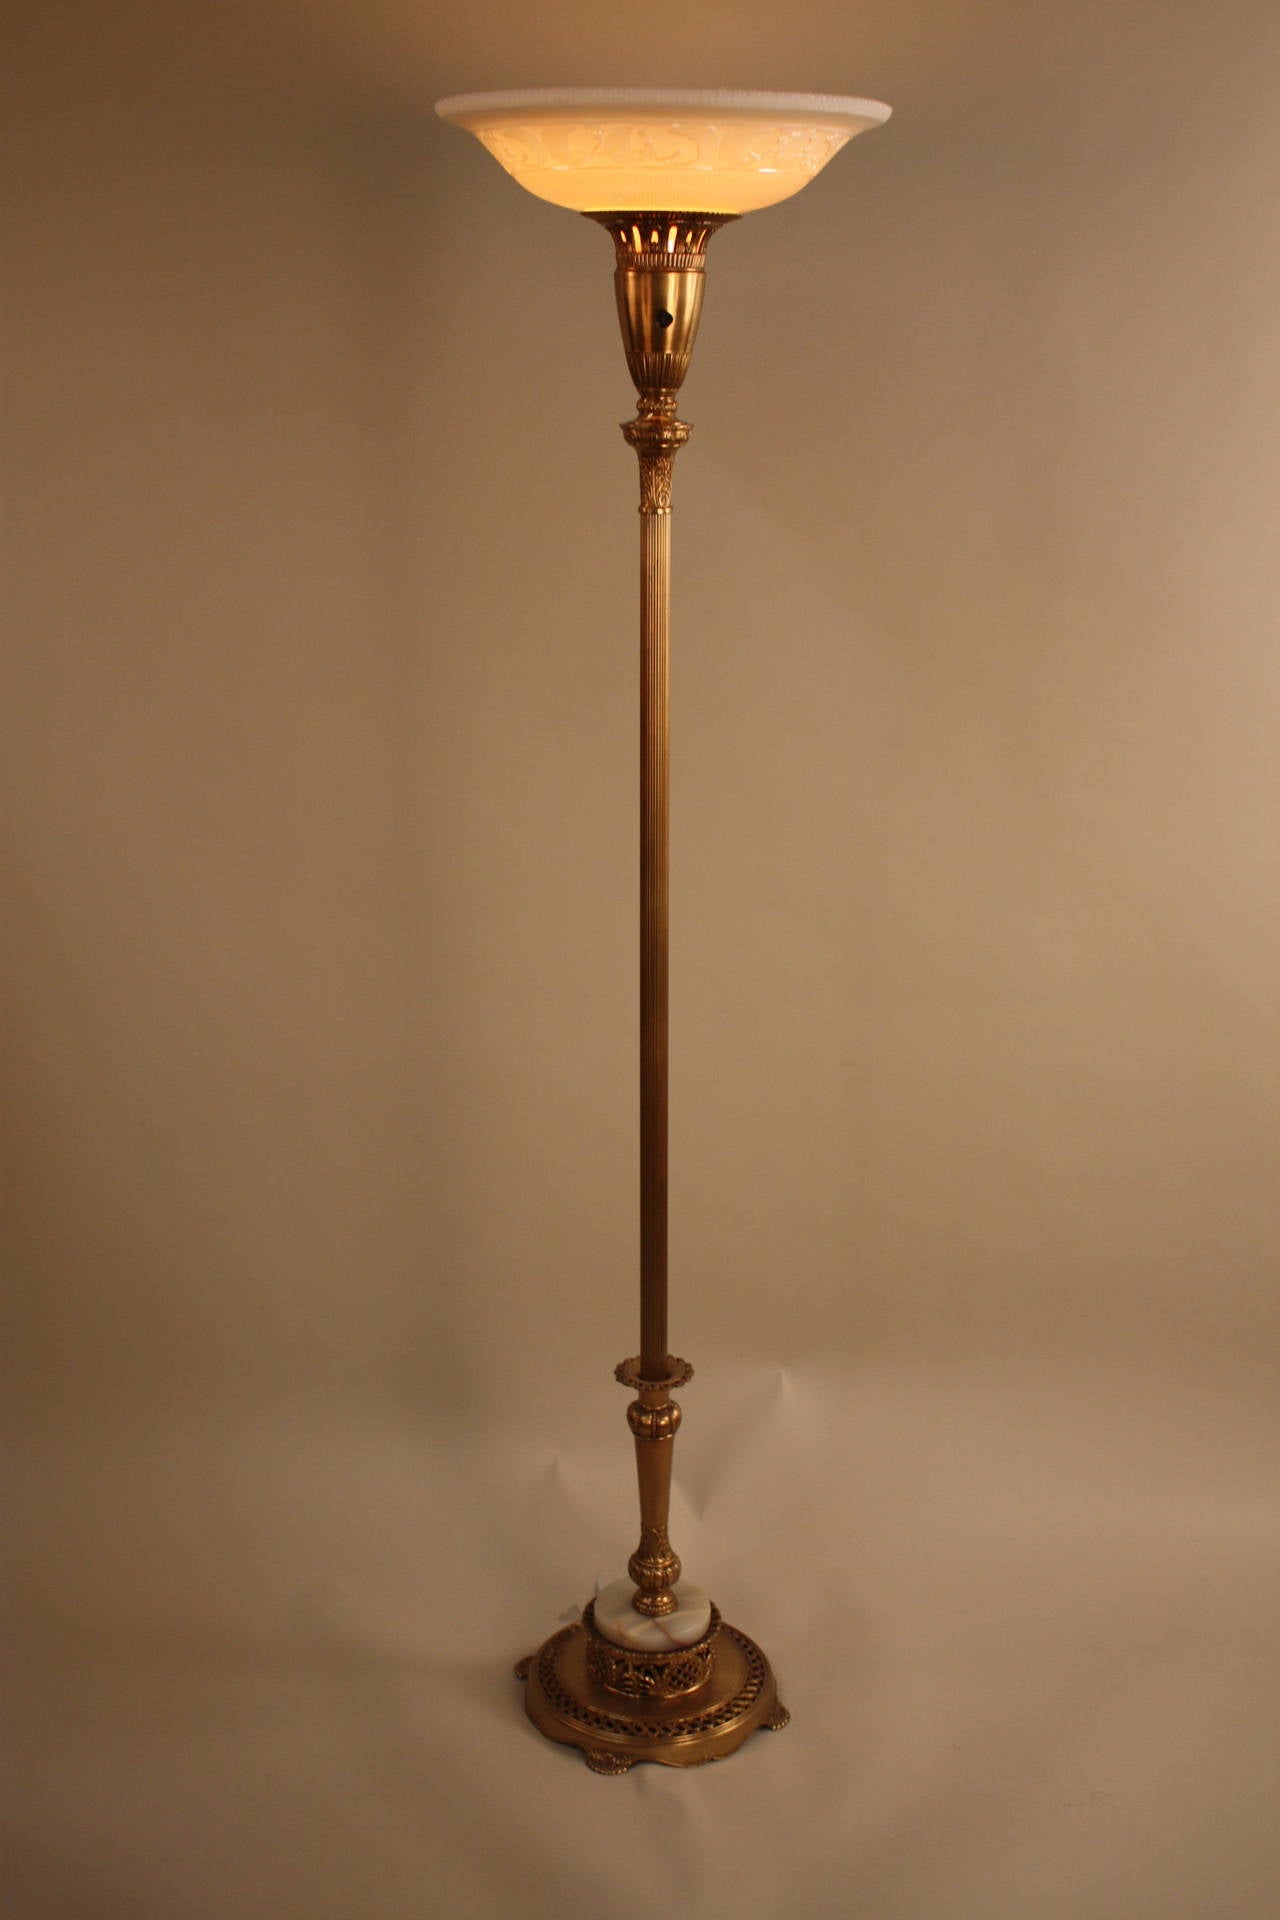 Elegant American Art Deco torchiere floor lamp with beautiful gold color and original glass shade.